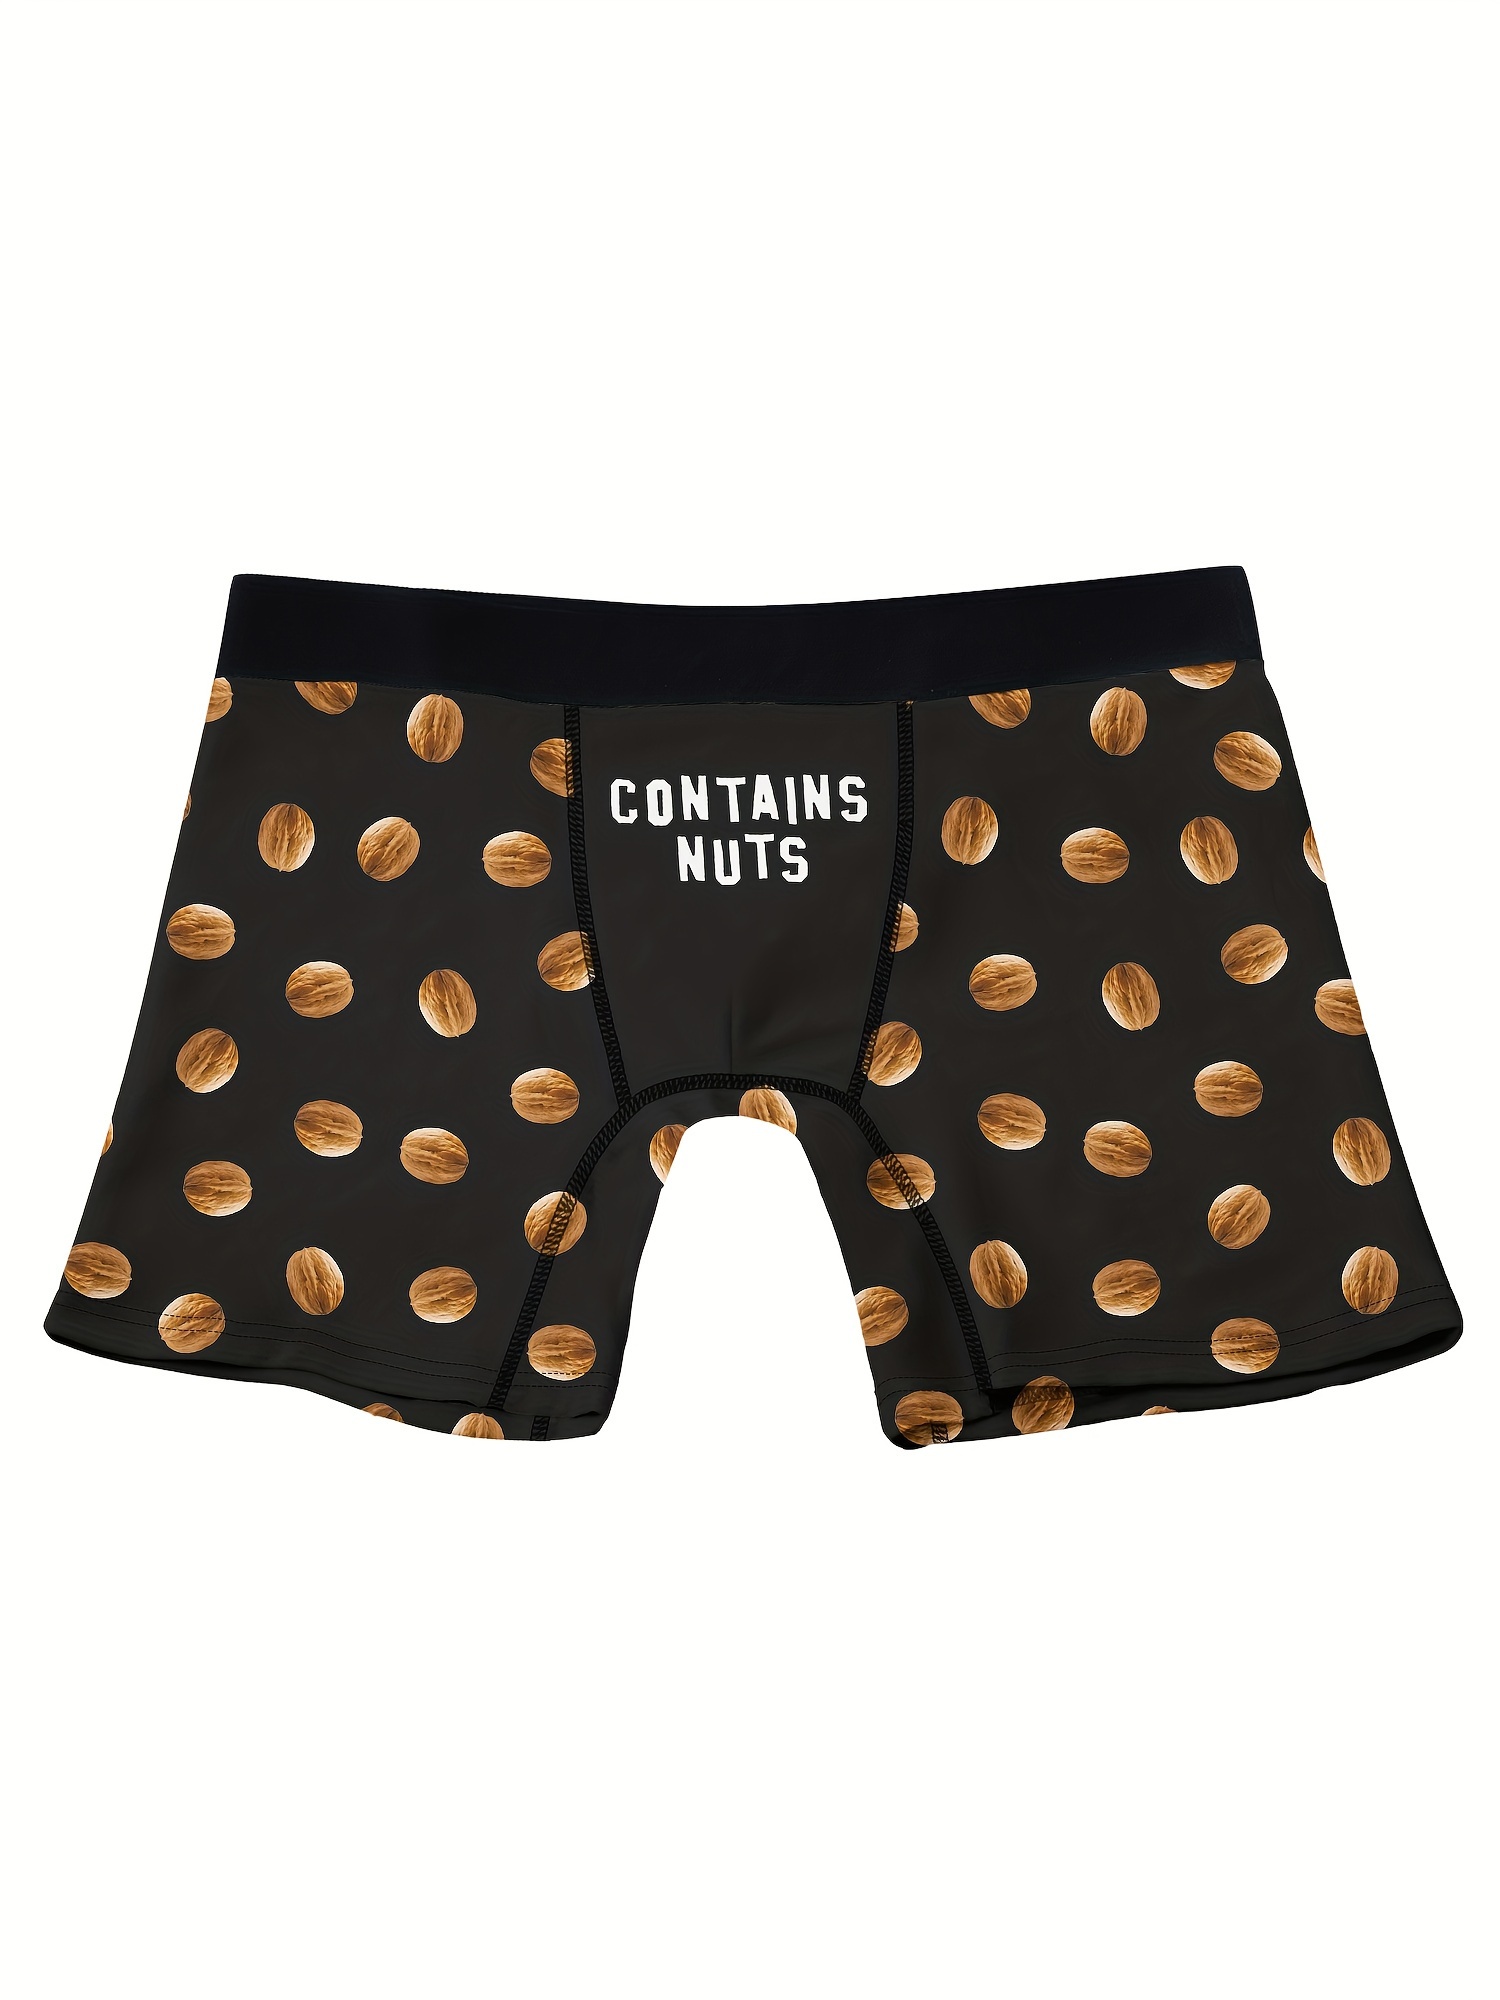 contains nuts print mens fashion novelty boxer briefs shorts breathable comfy high stretch boxer trunks mens underwear details 1